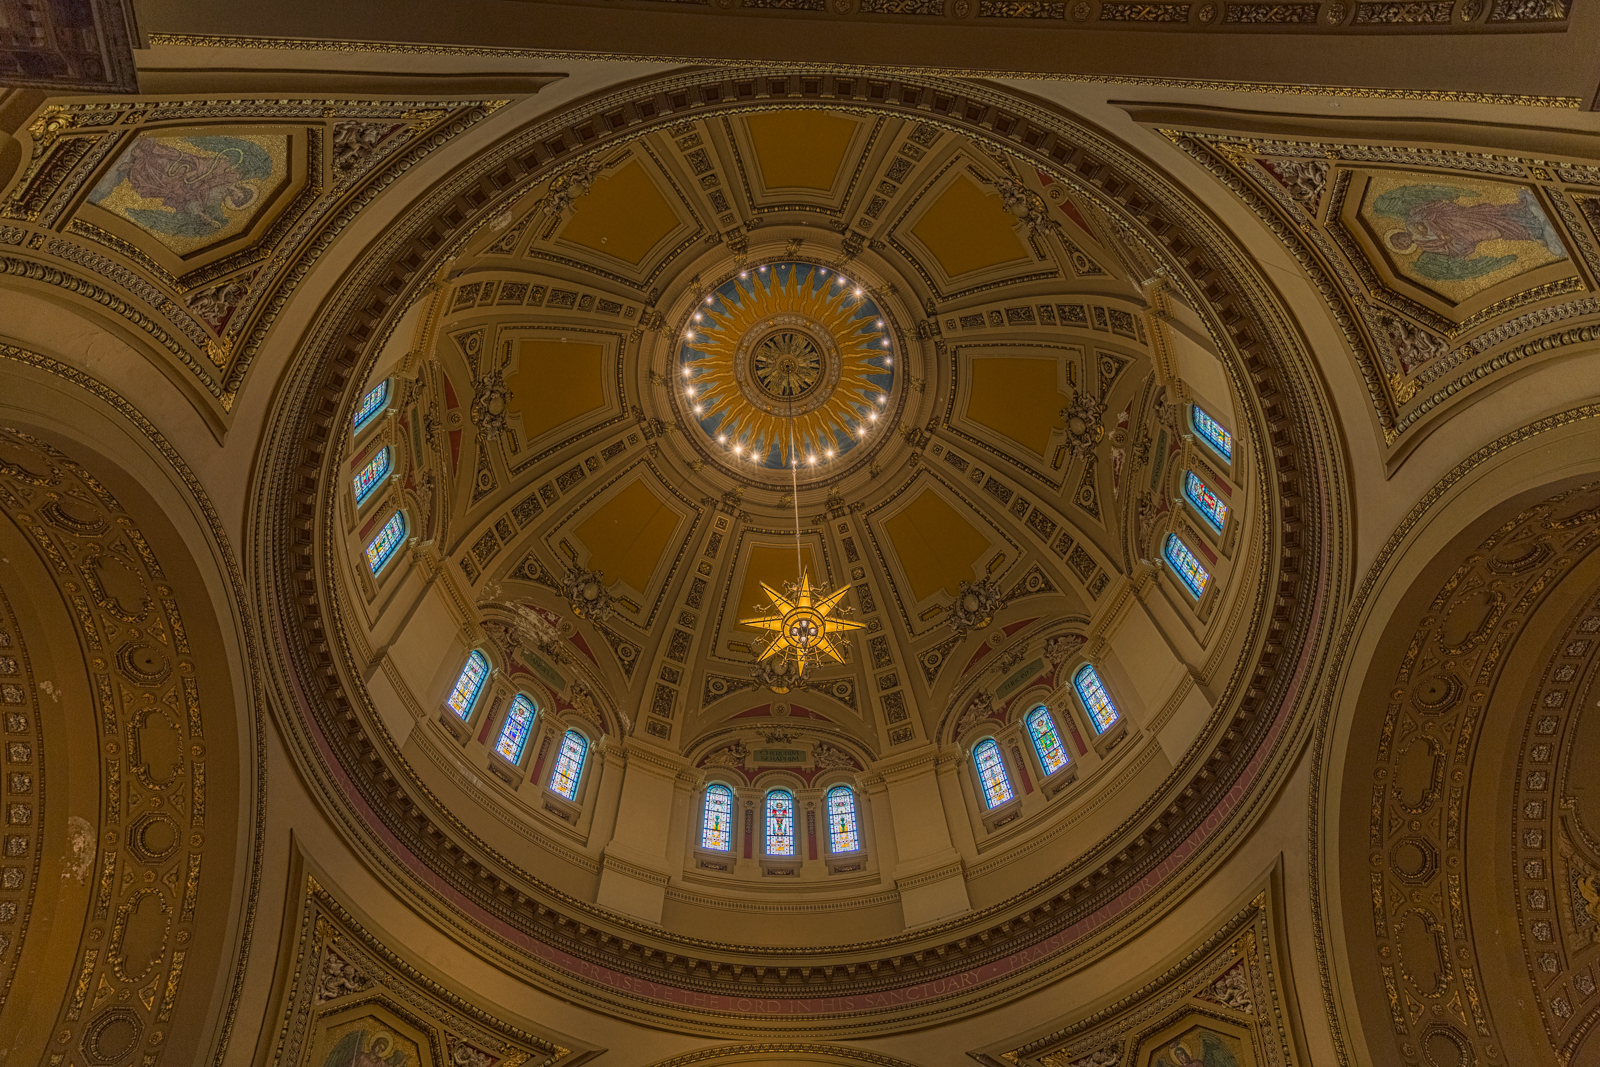 Cathedral Of St Paul Matthew Paulson Photography